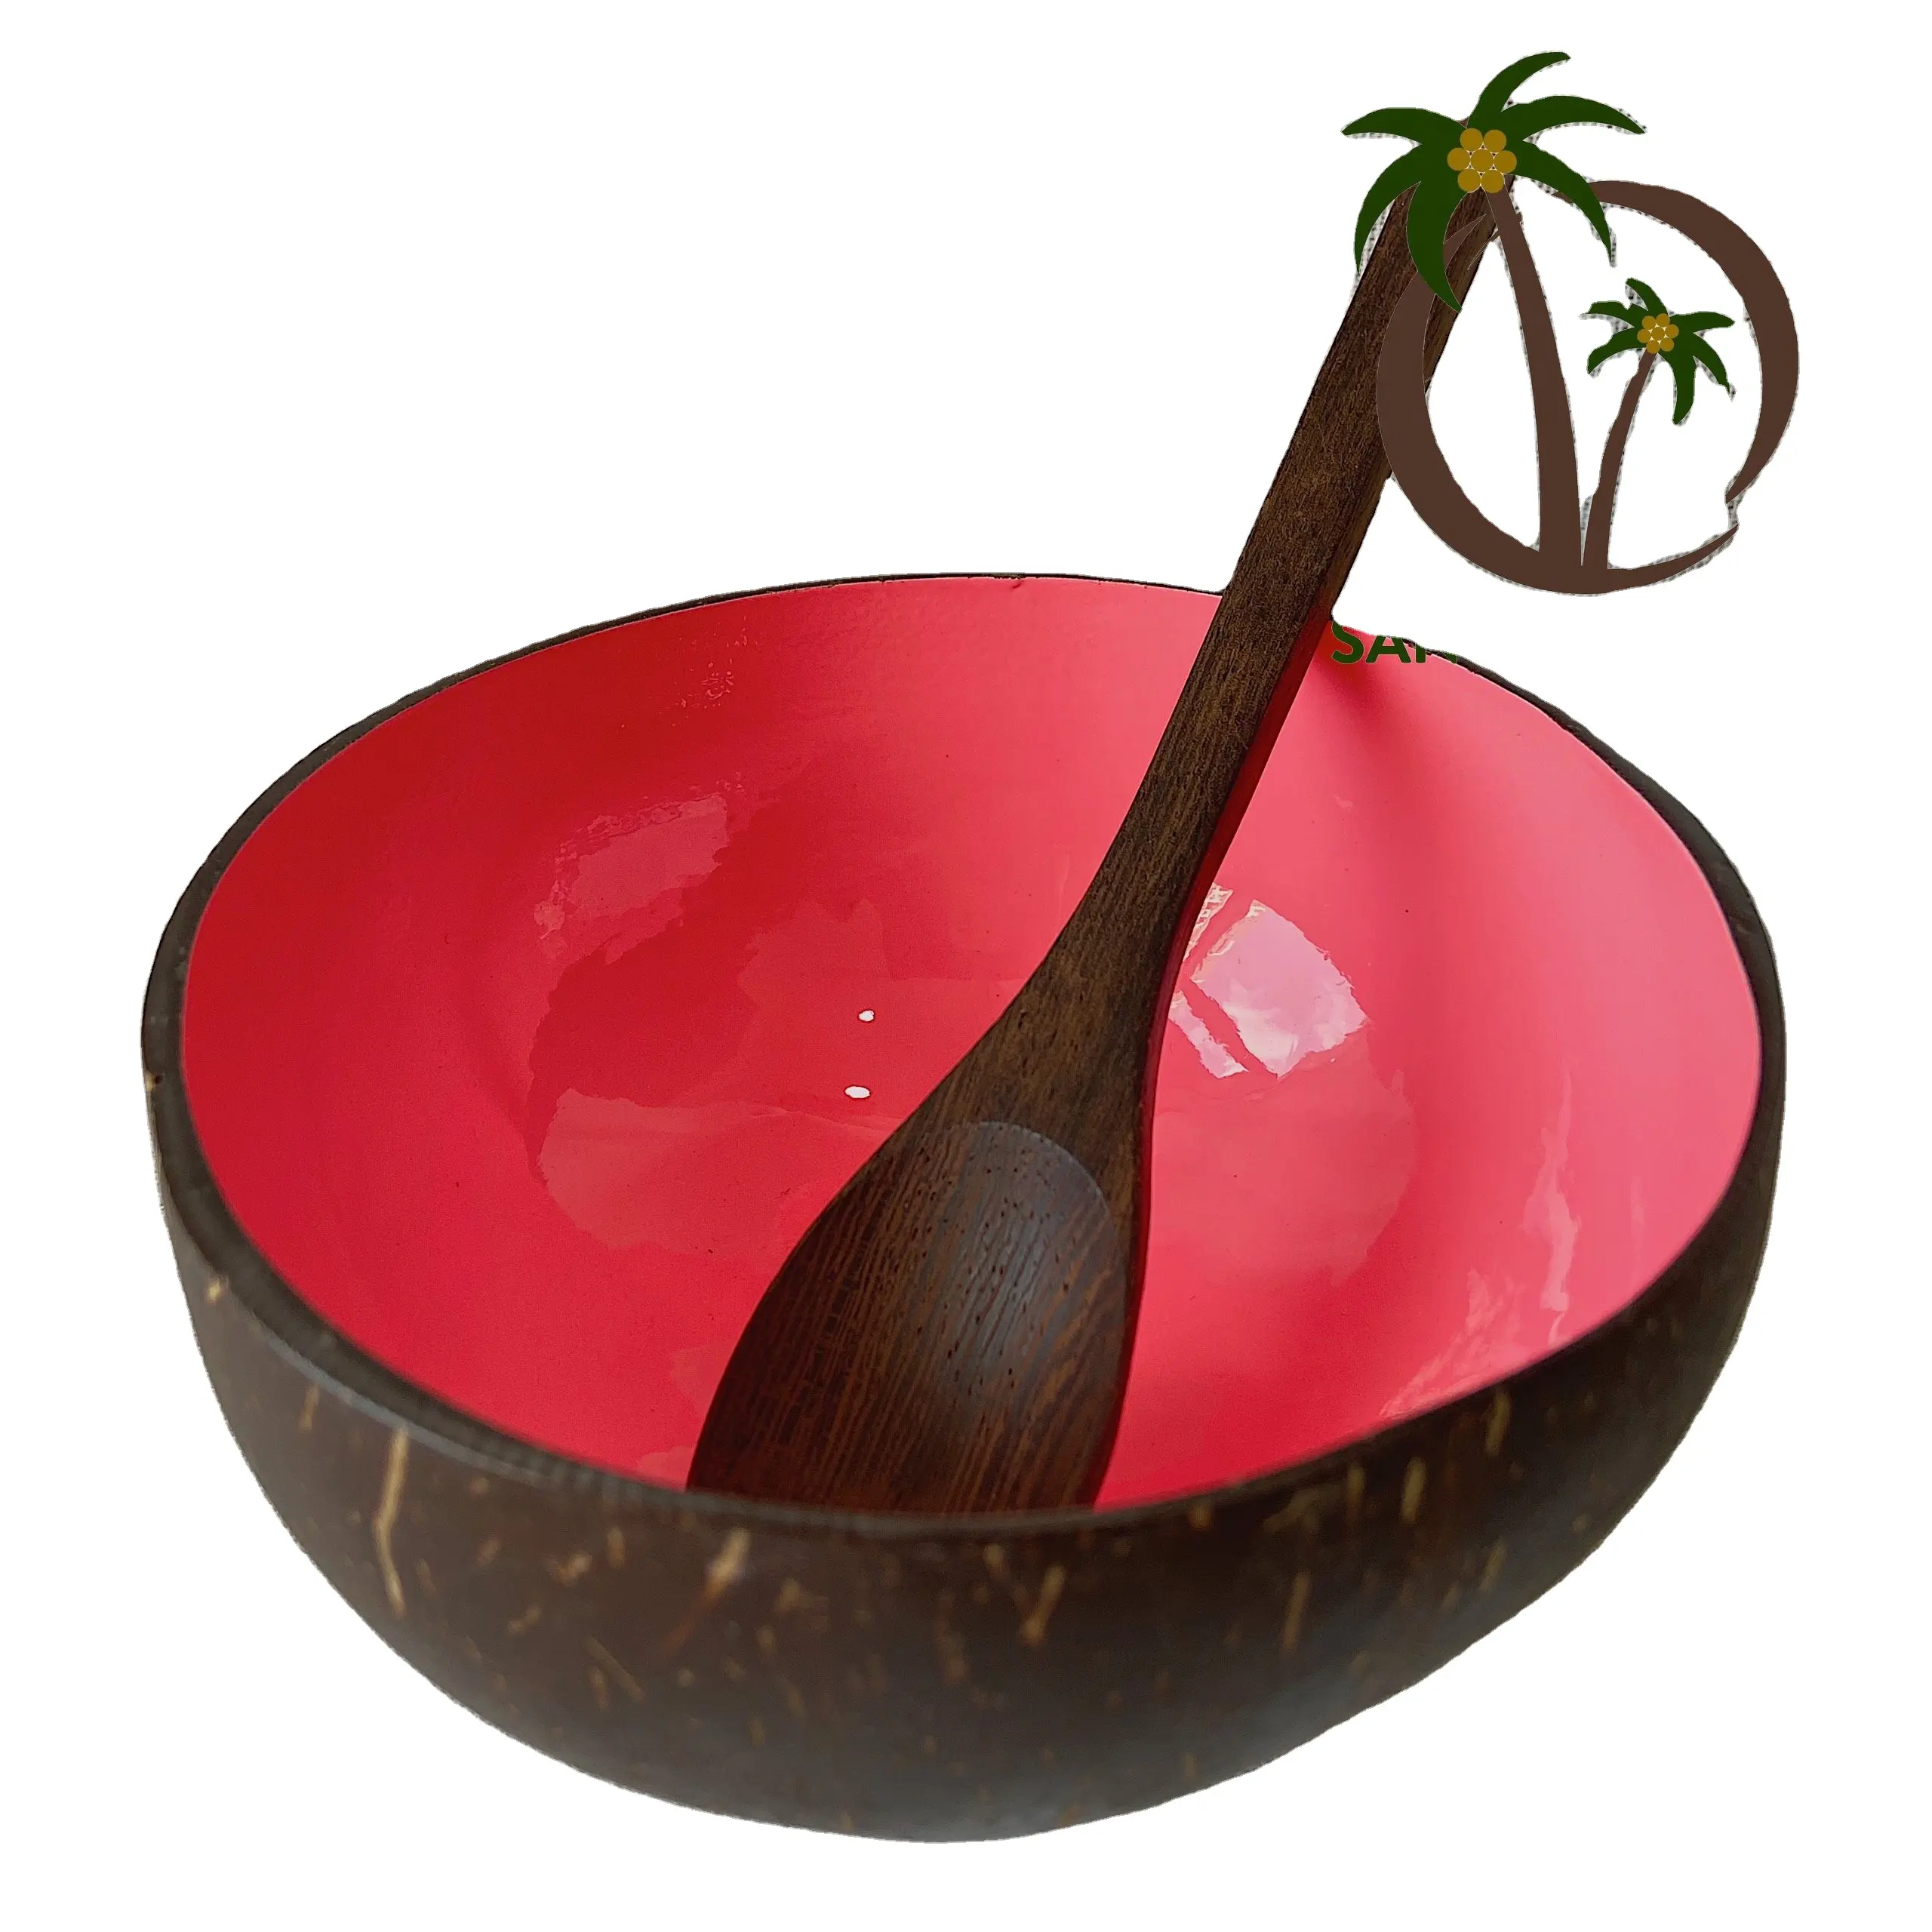 100% NATURAL COCONUT SHELL LACQUERED BOWLS FROM VIETNAM CHEAP PRICE/ HANDICRAFT PRODUCTS FOR GIFT ECO-FRIENDLY DESIGNED BOWL